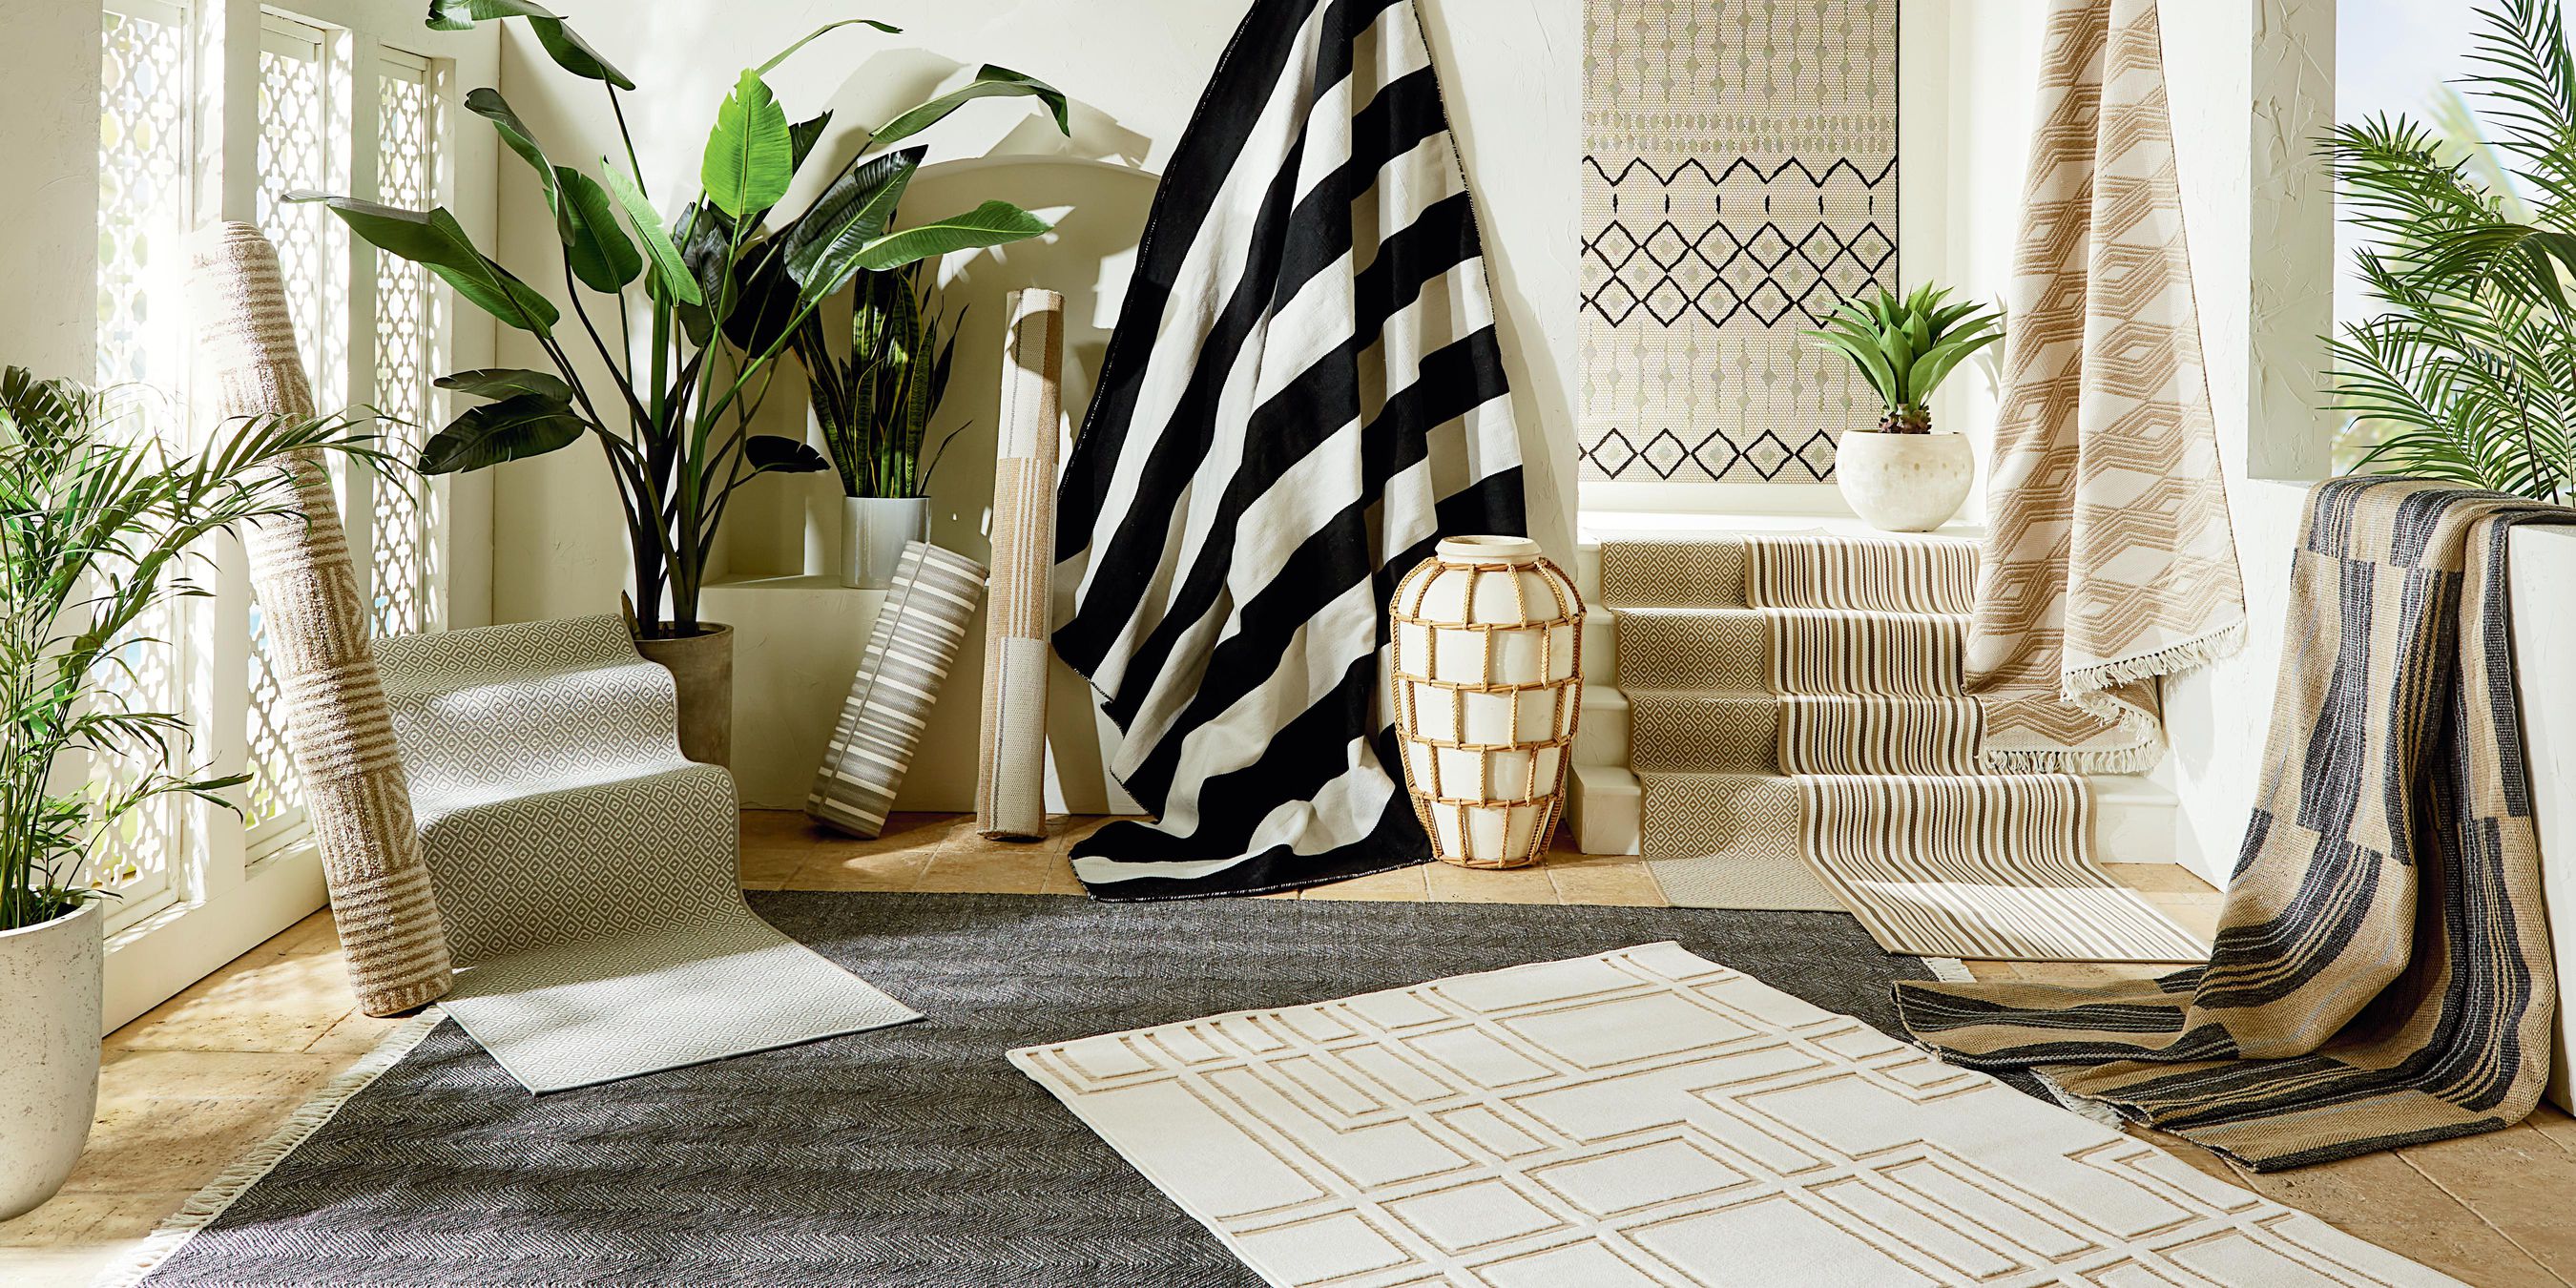 How to Choose the Right Area Rug for Under Your Bed